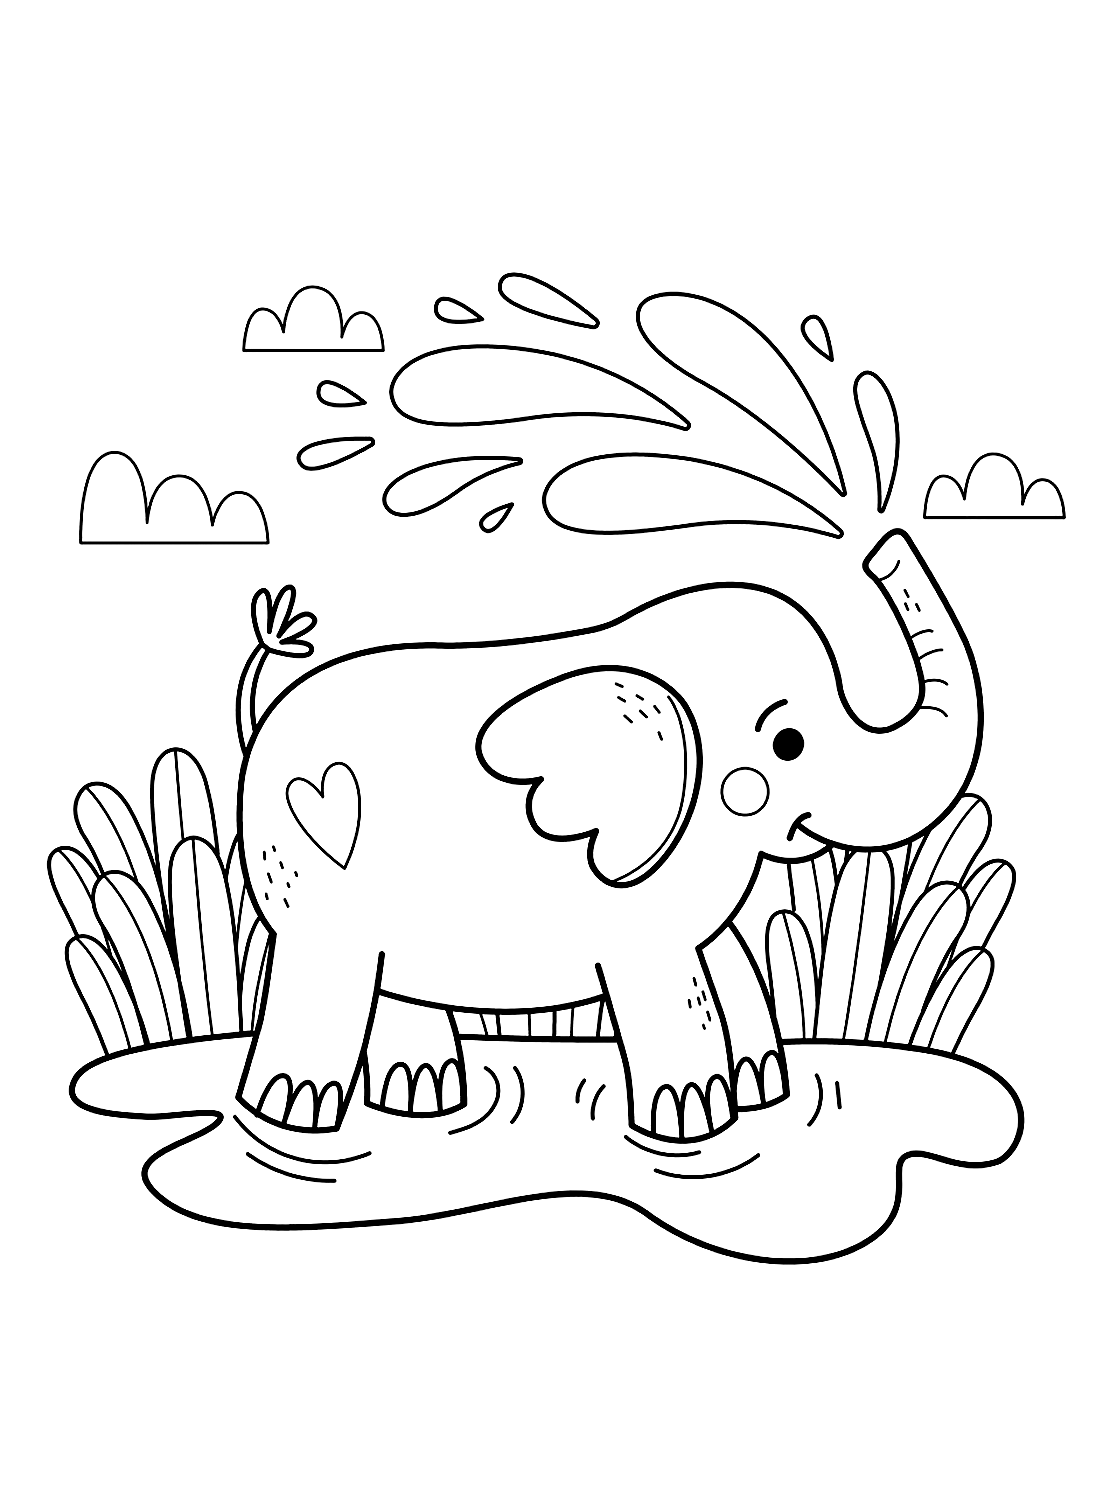 Coloring pages of Elephant